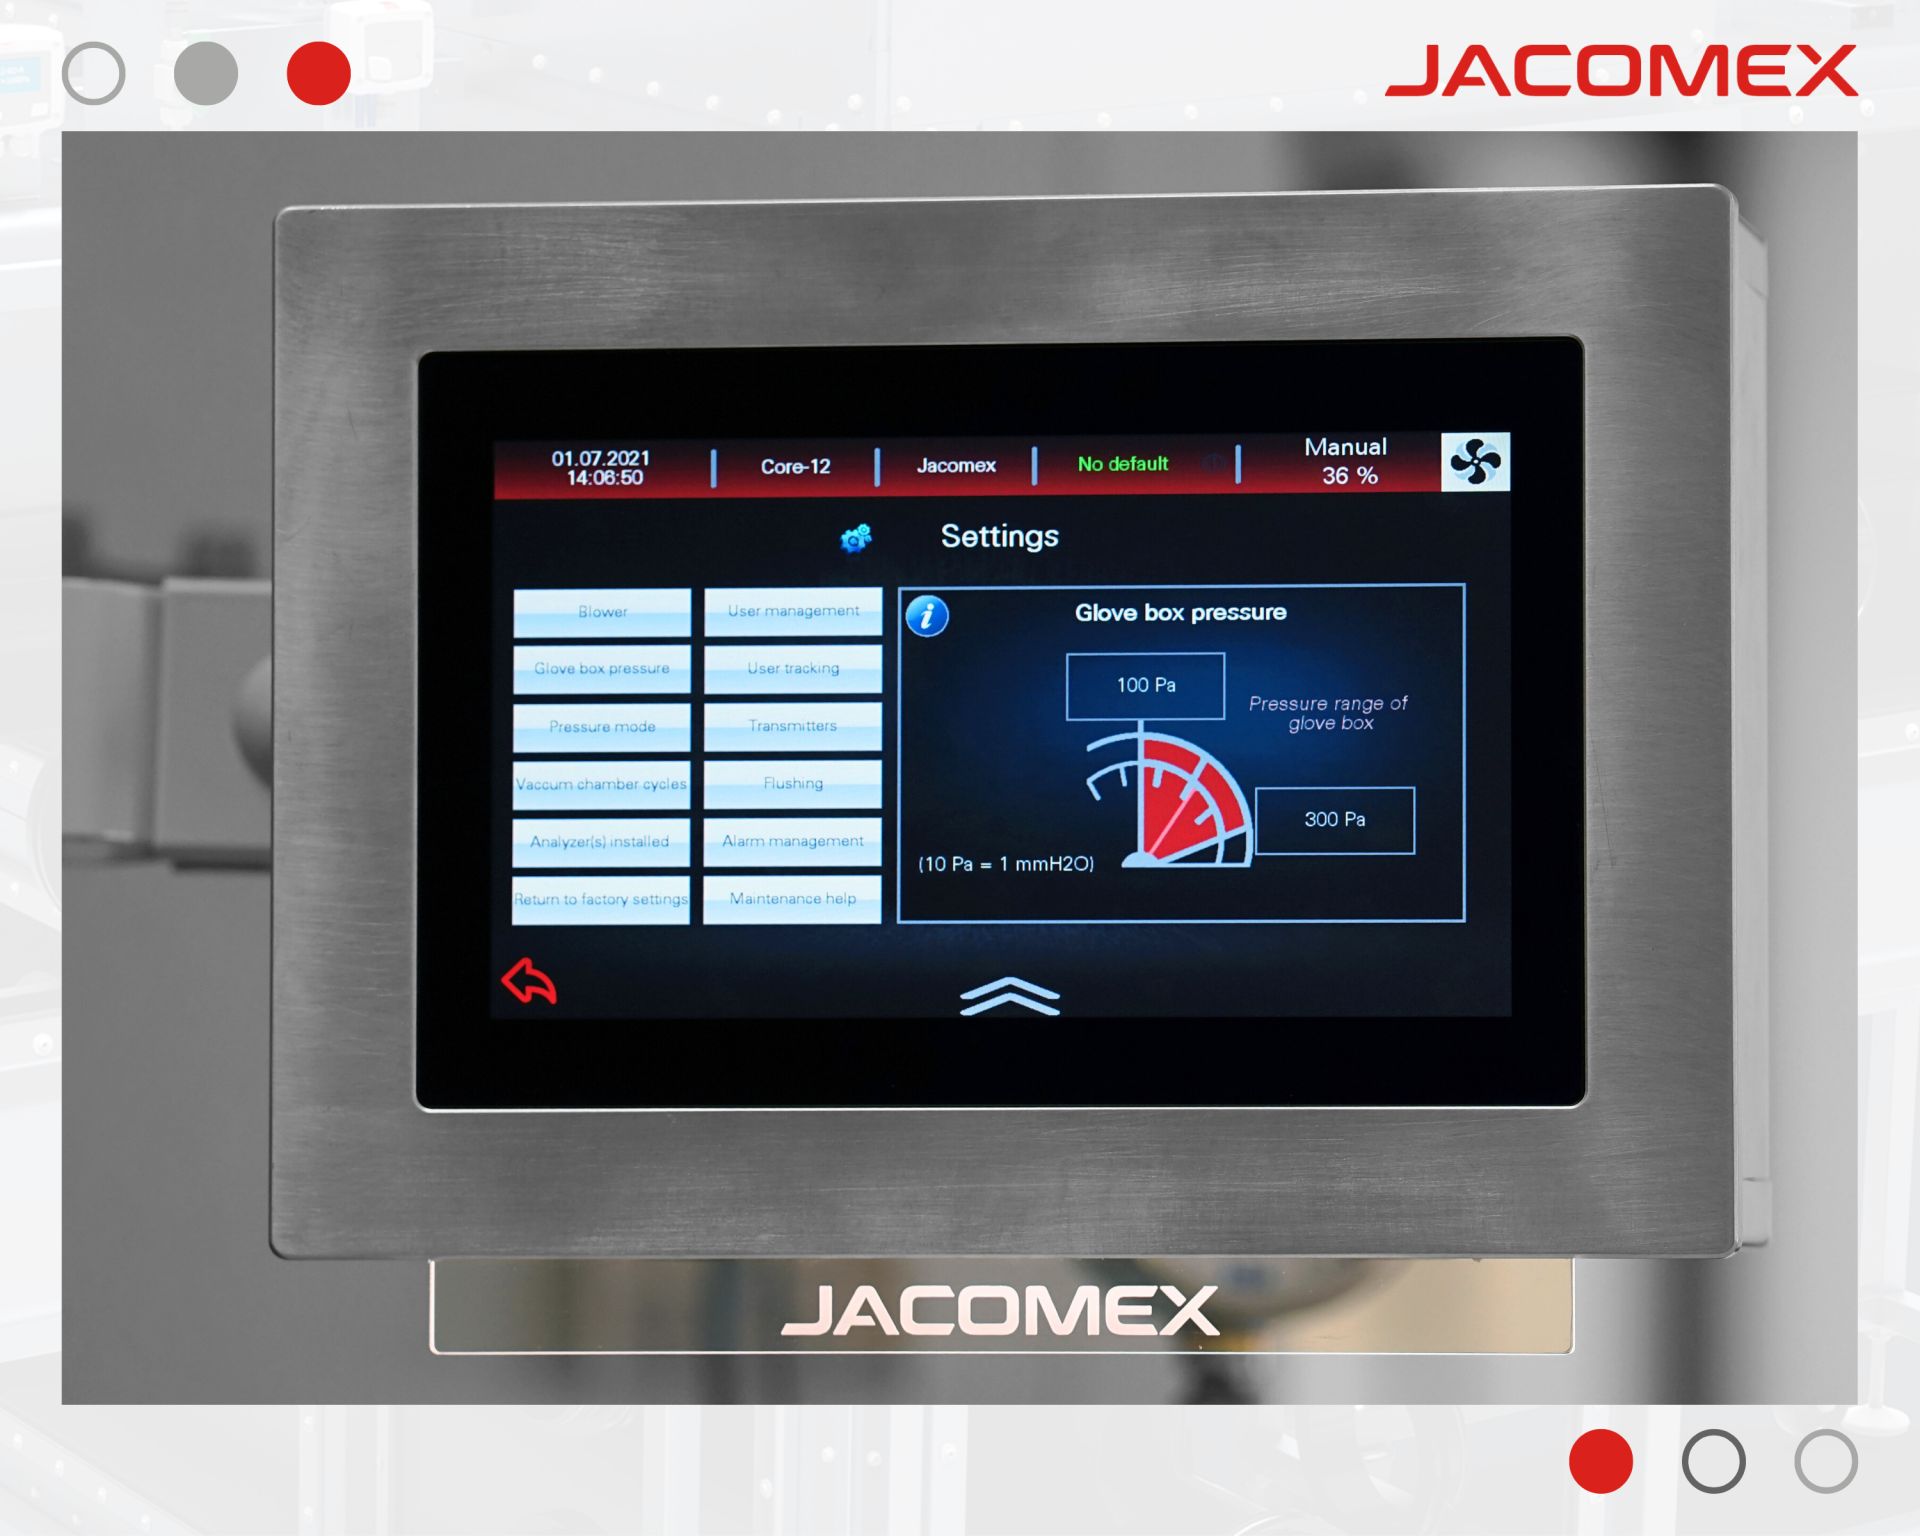 Technical Evolution at Jacomex